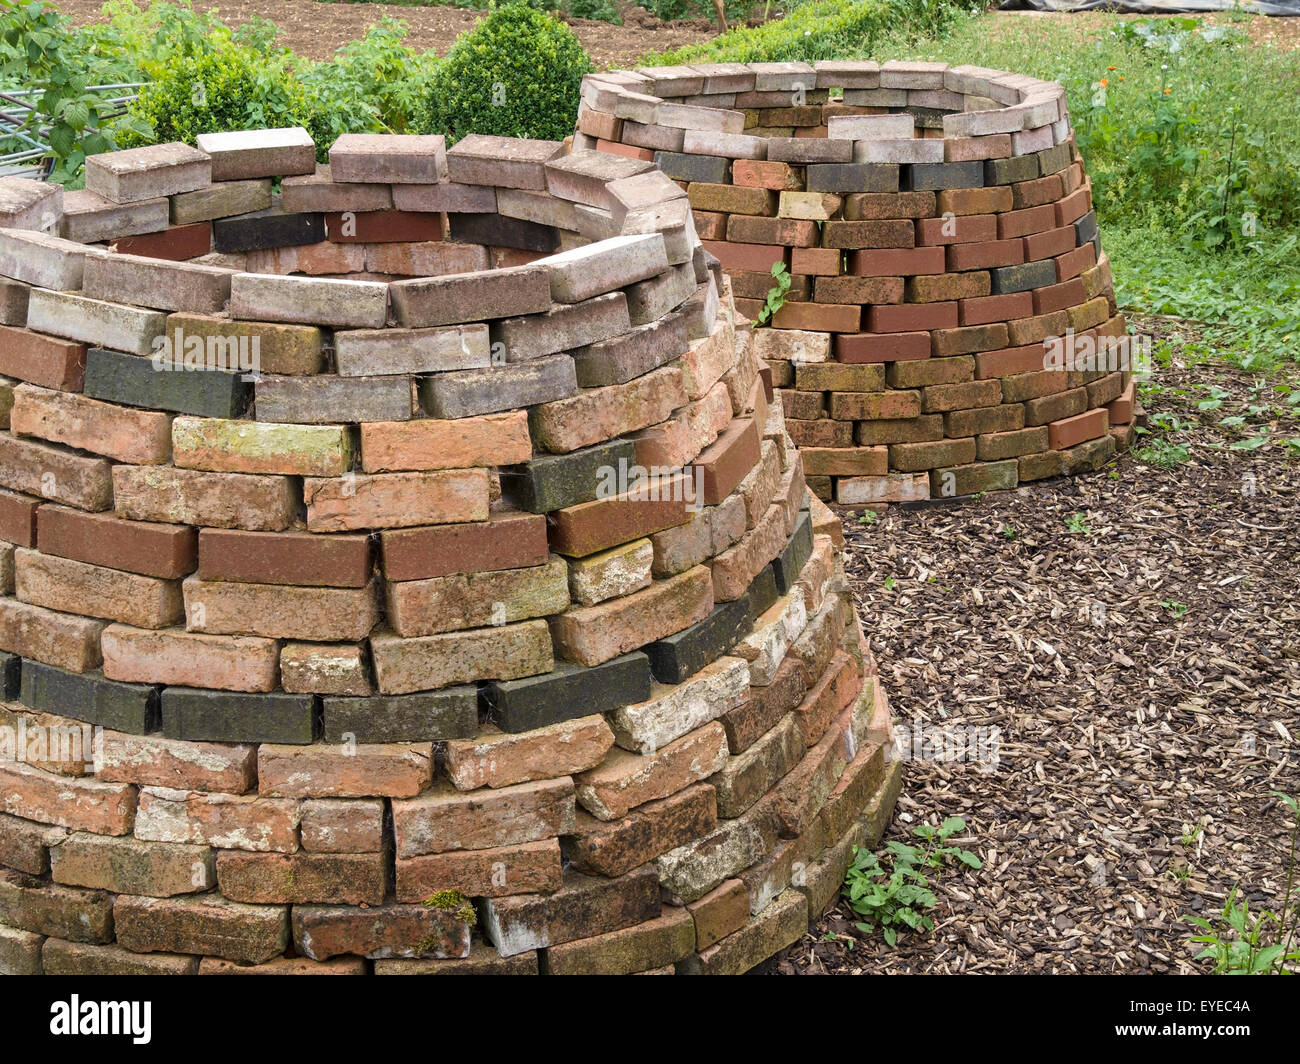 Old Victorian style brick compost bins, Barnsdale Gardens, England, UK. Stock Photo